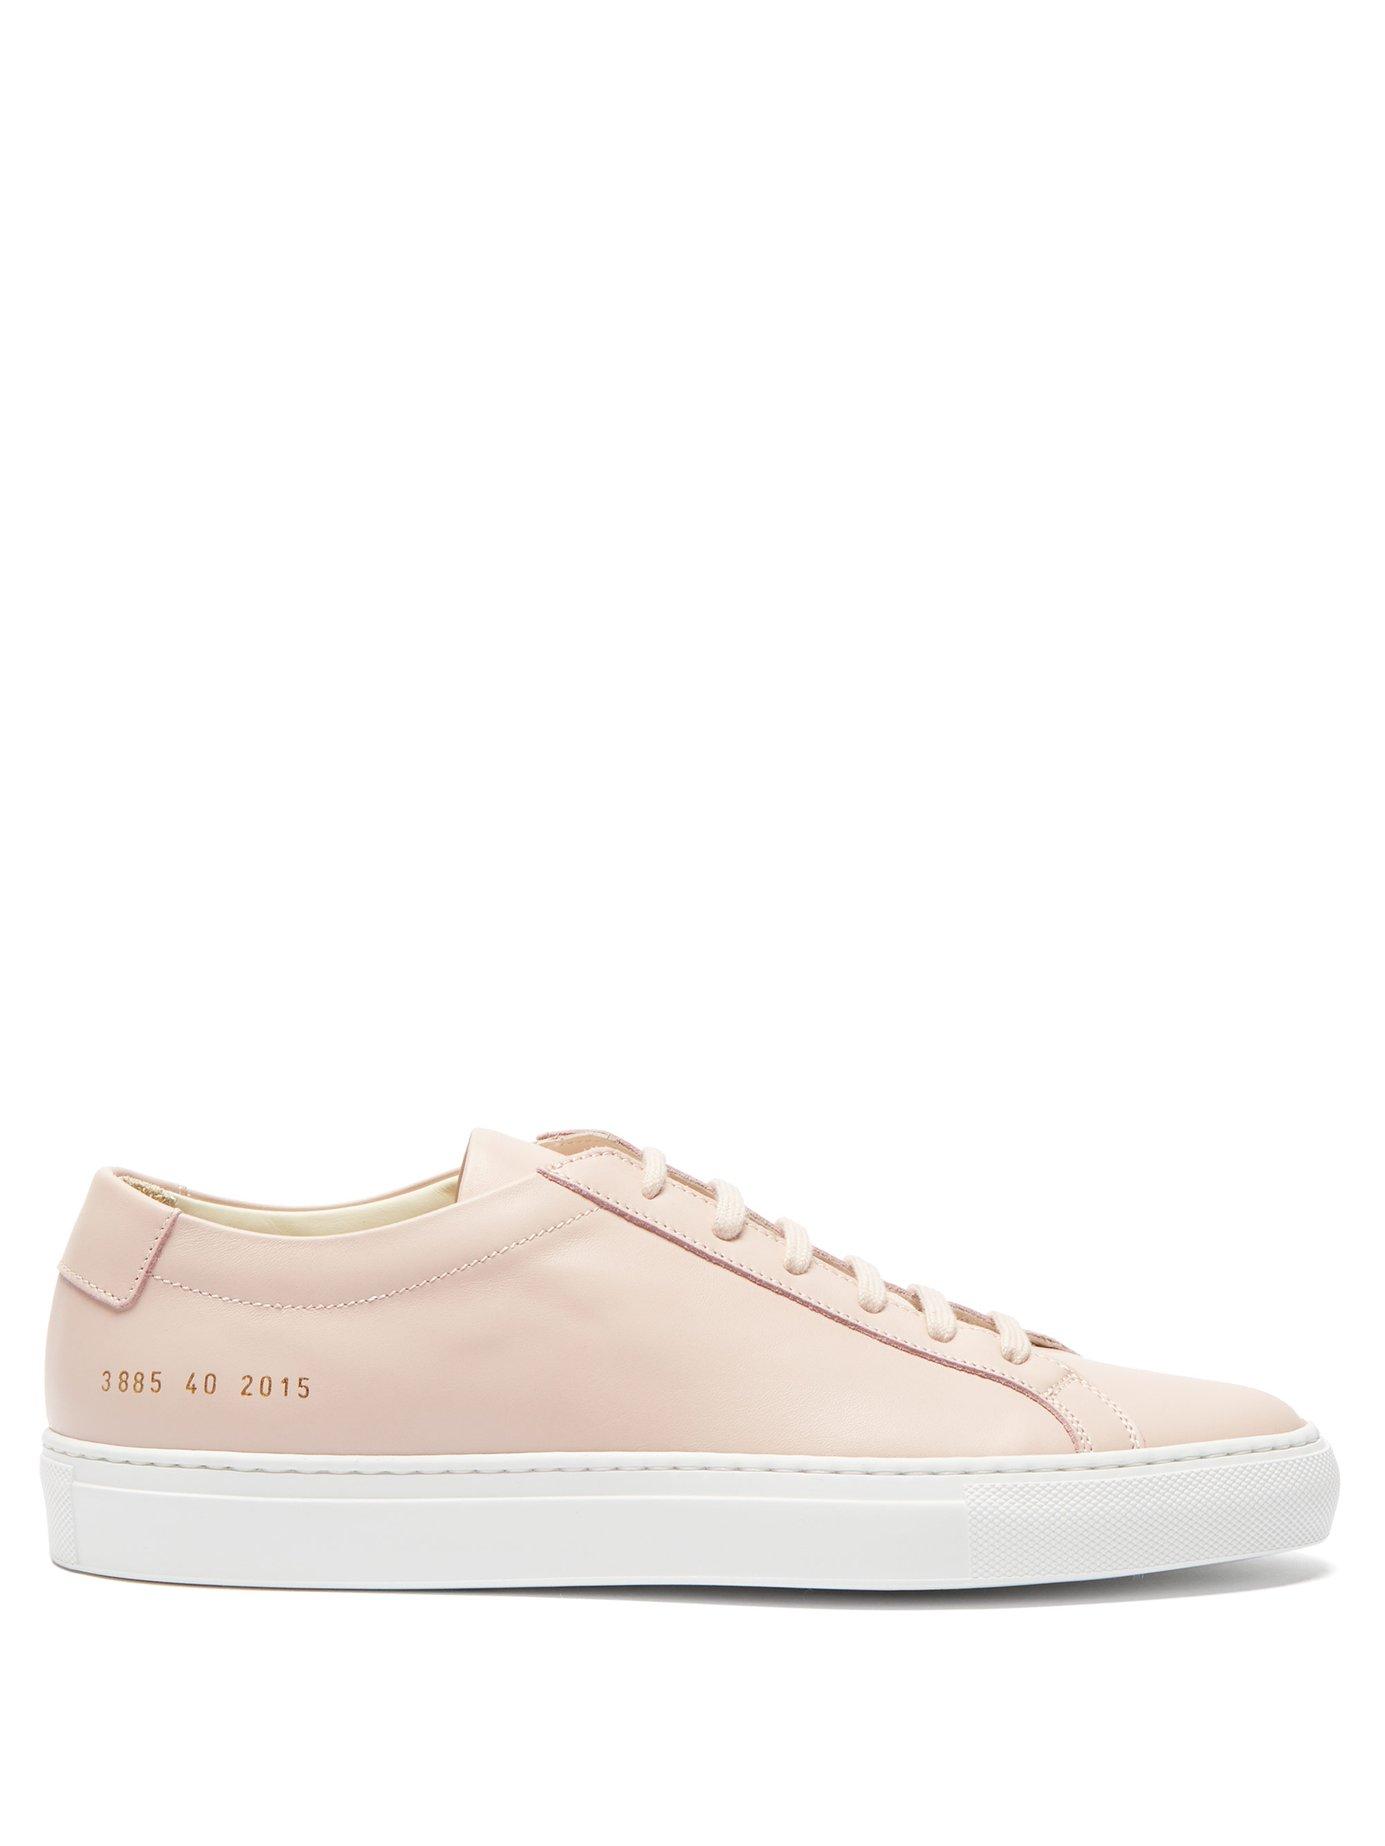 Common Projects Original Achilles Low Top Leather Trainers in Light ...